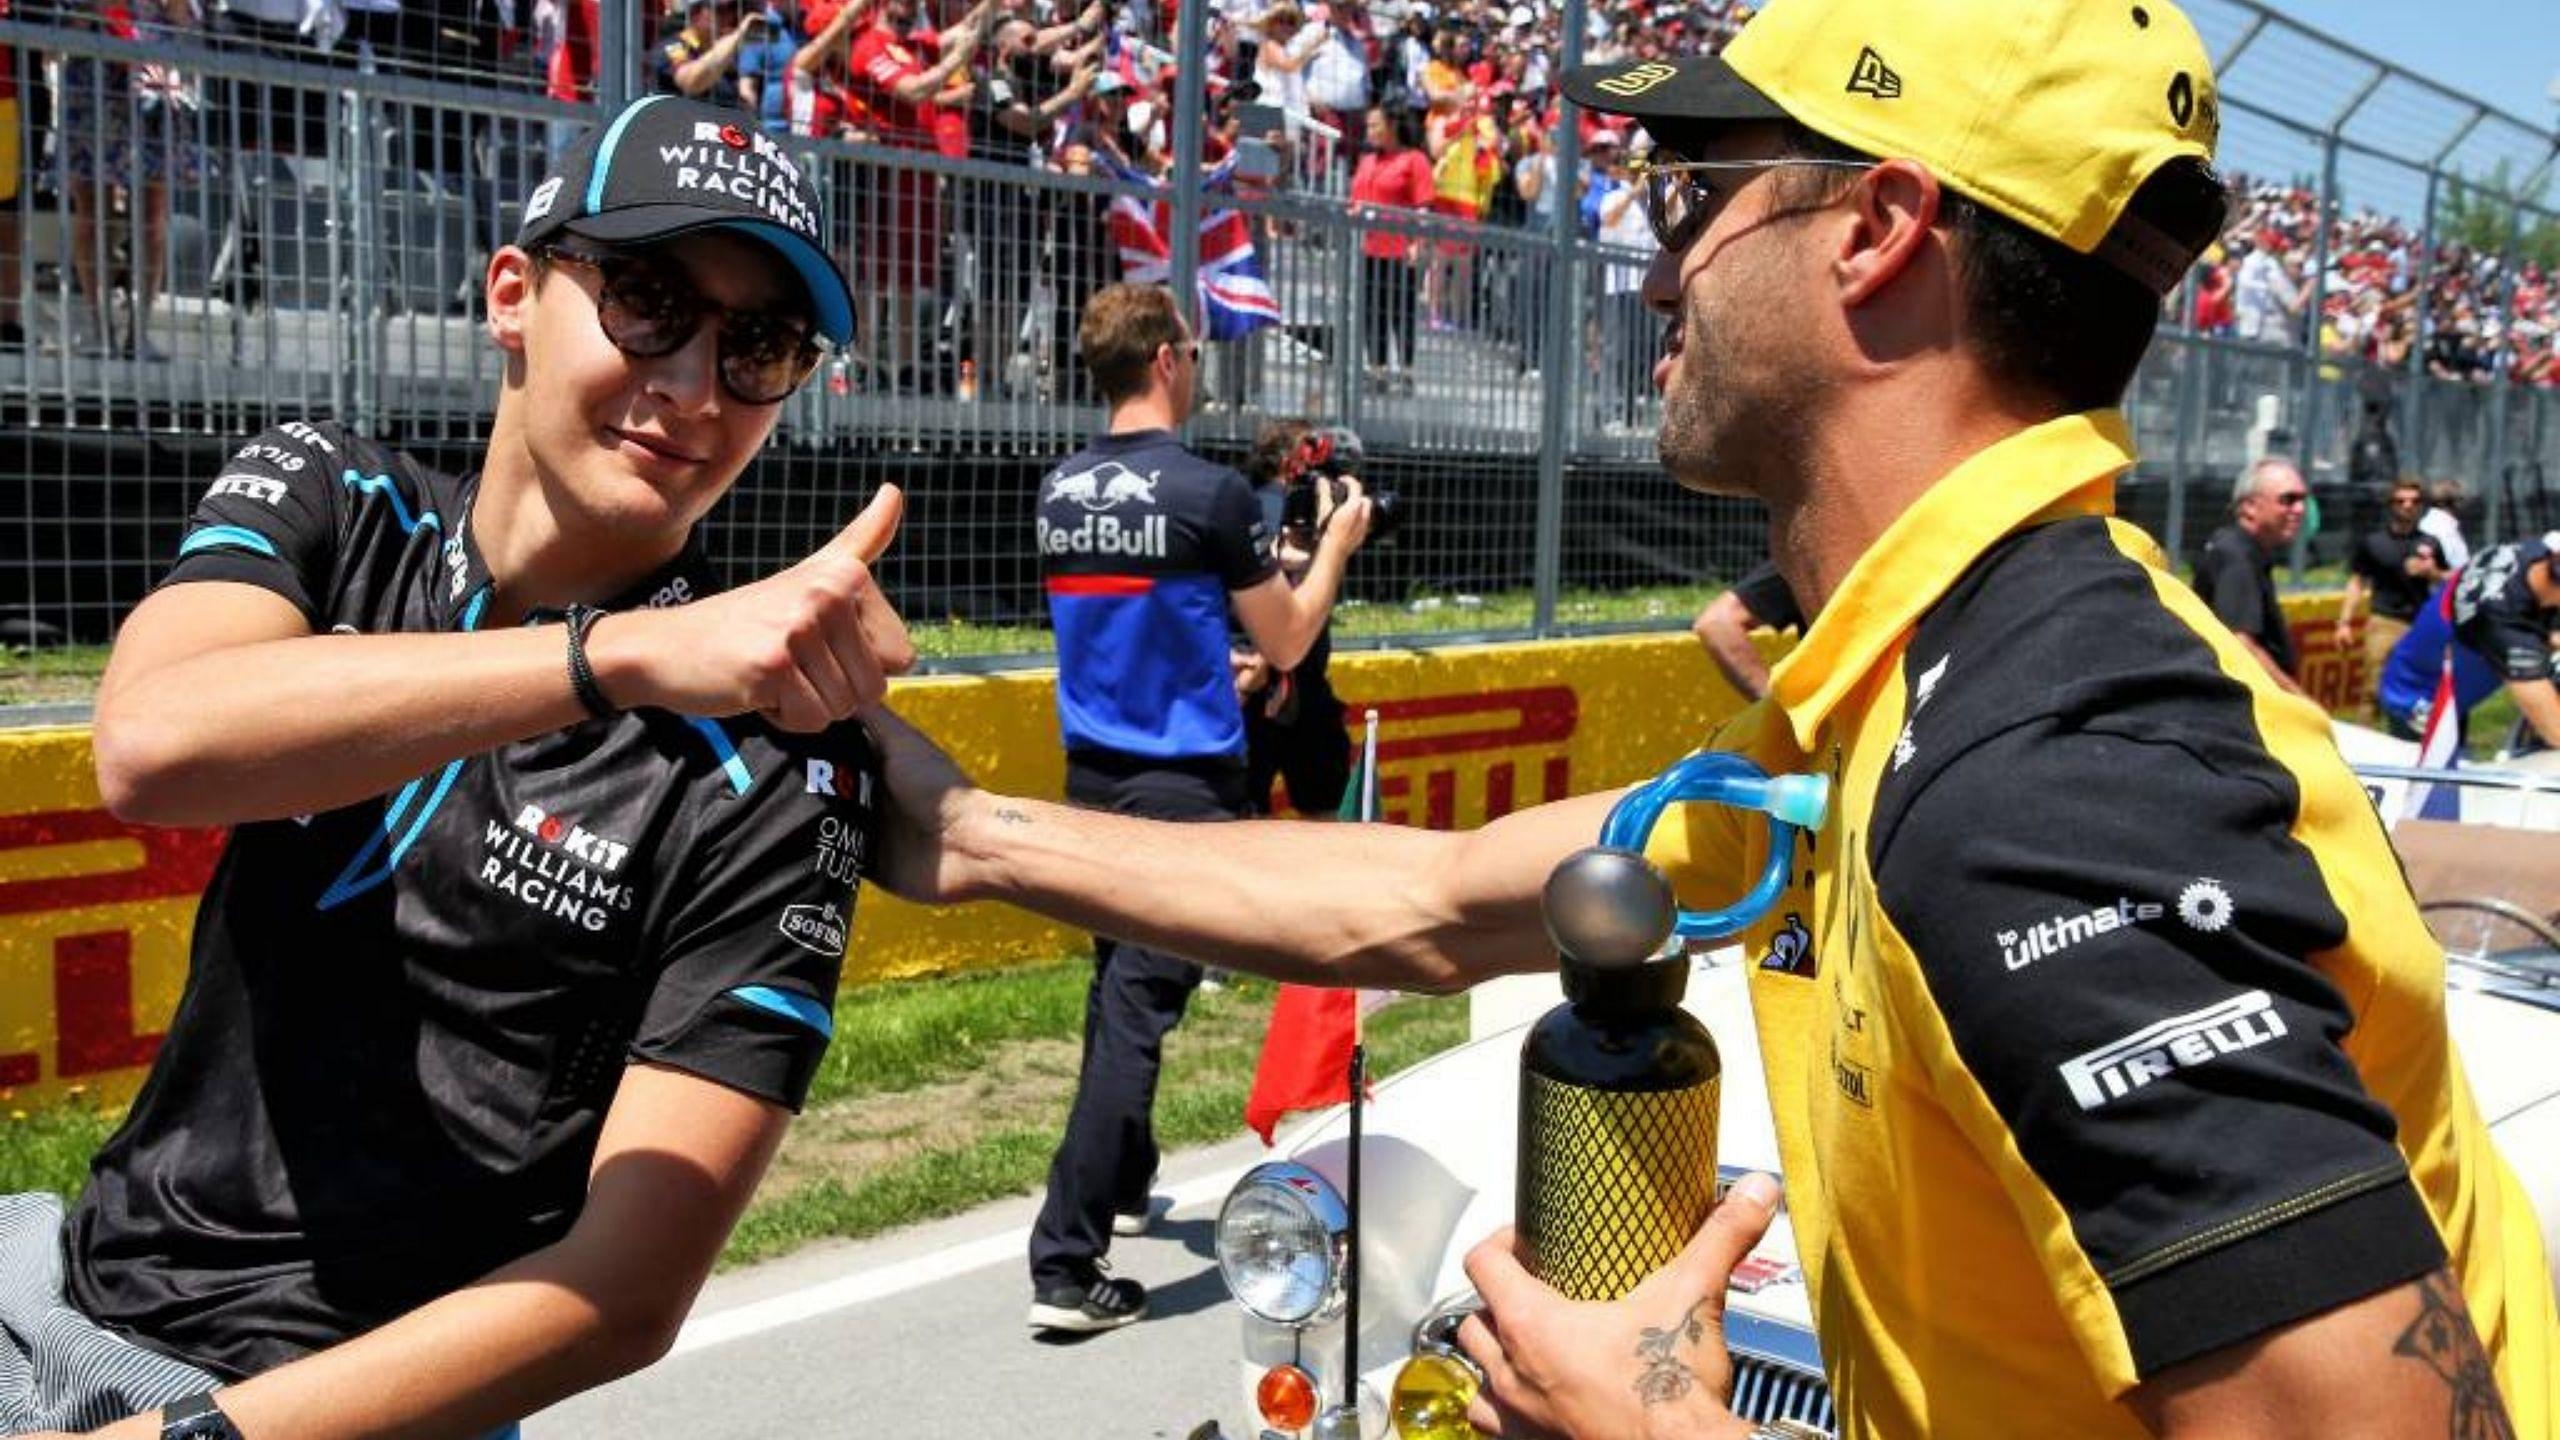 "I was hungry to go and compete" - Covid-19 lockdown made Daniel Ricciardo fall in love with Formula 1 all over again